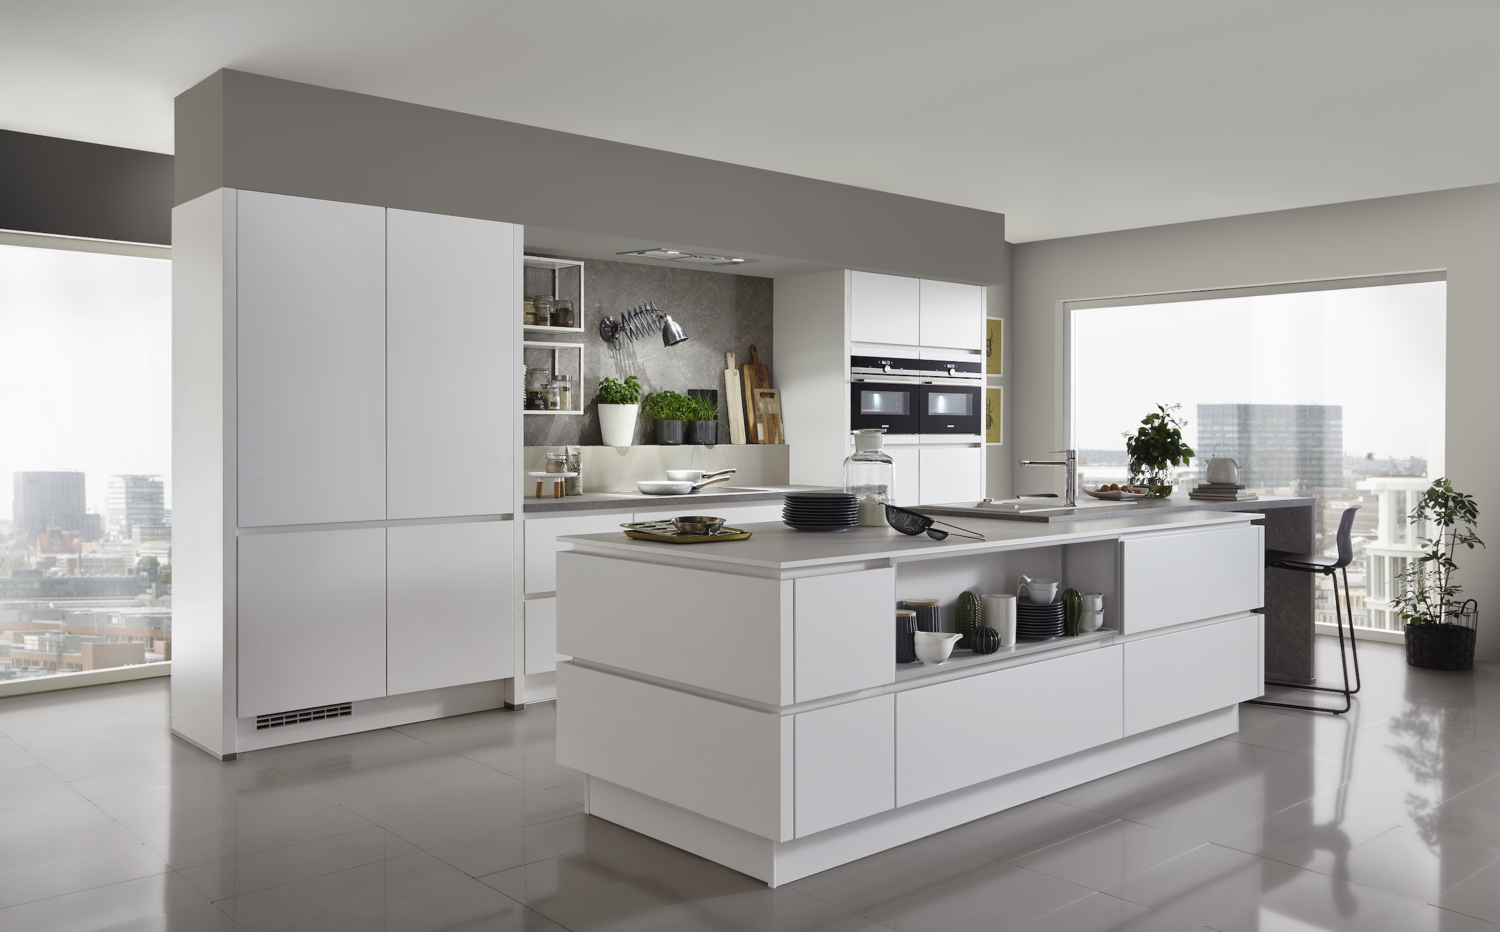 solid-front kitchen cabinets